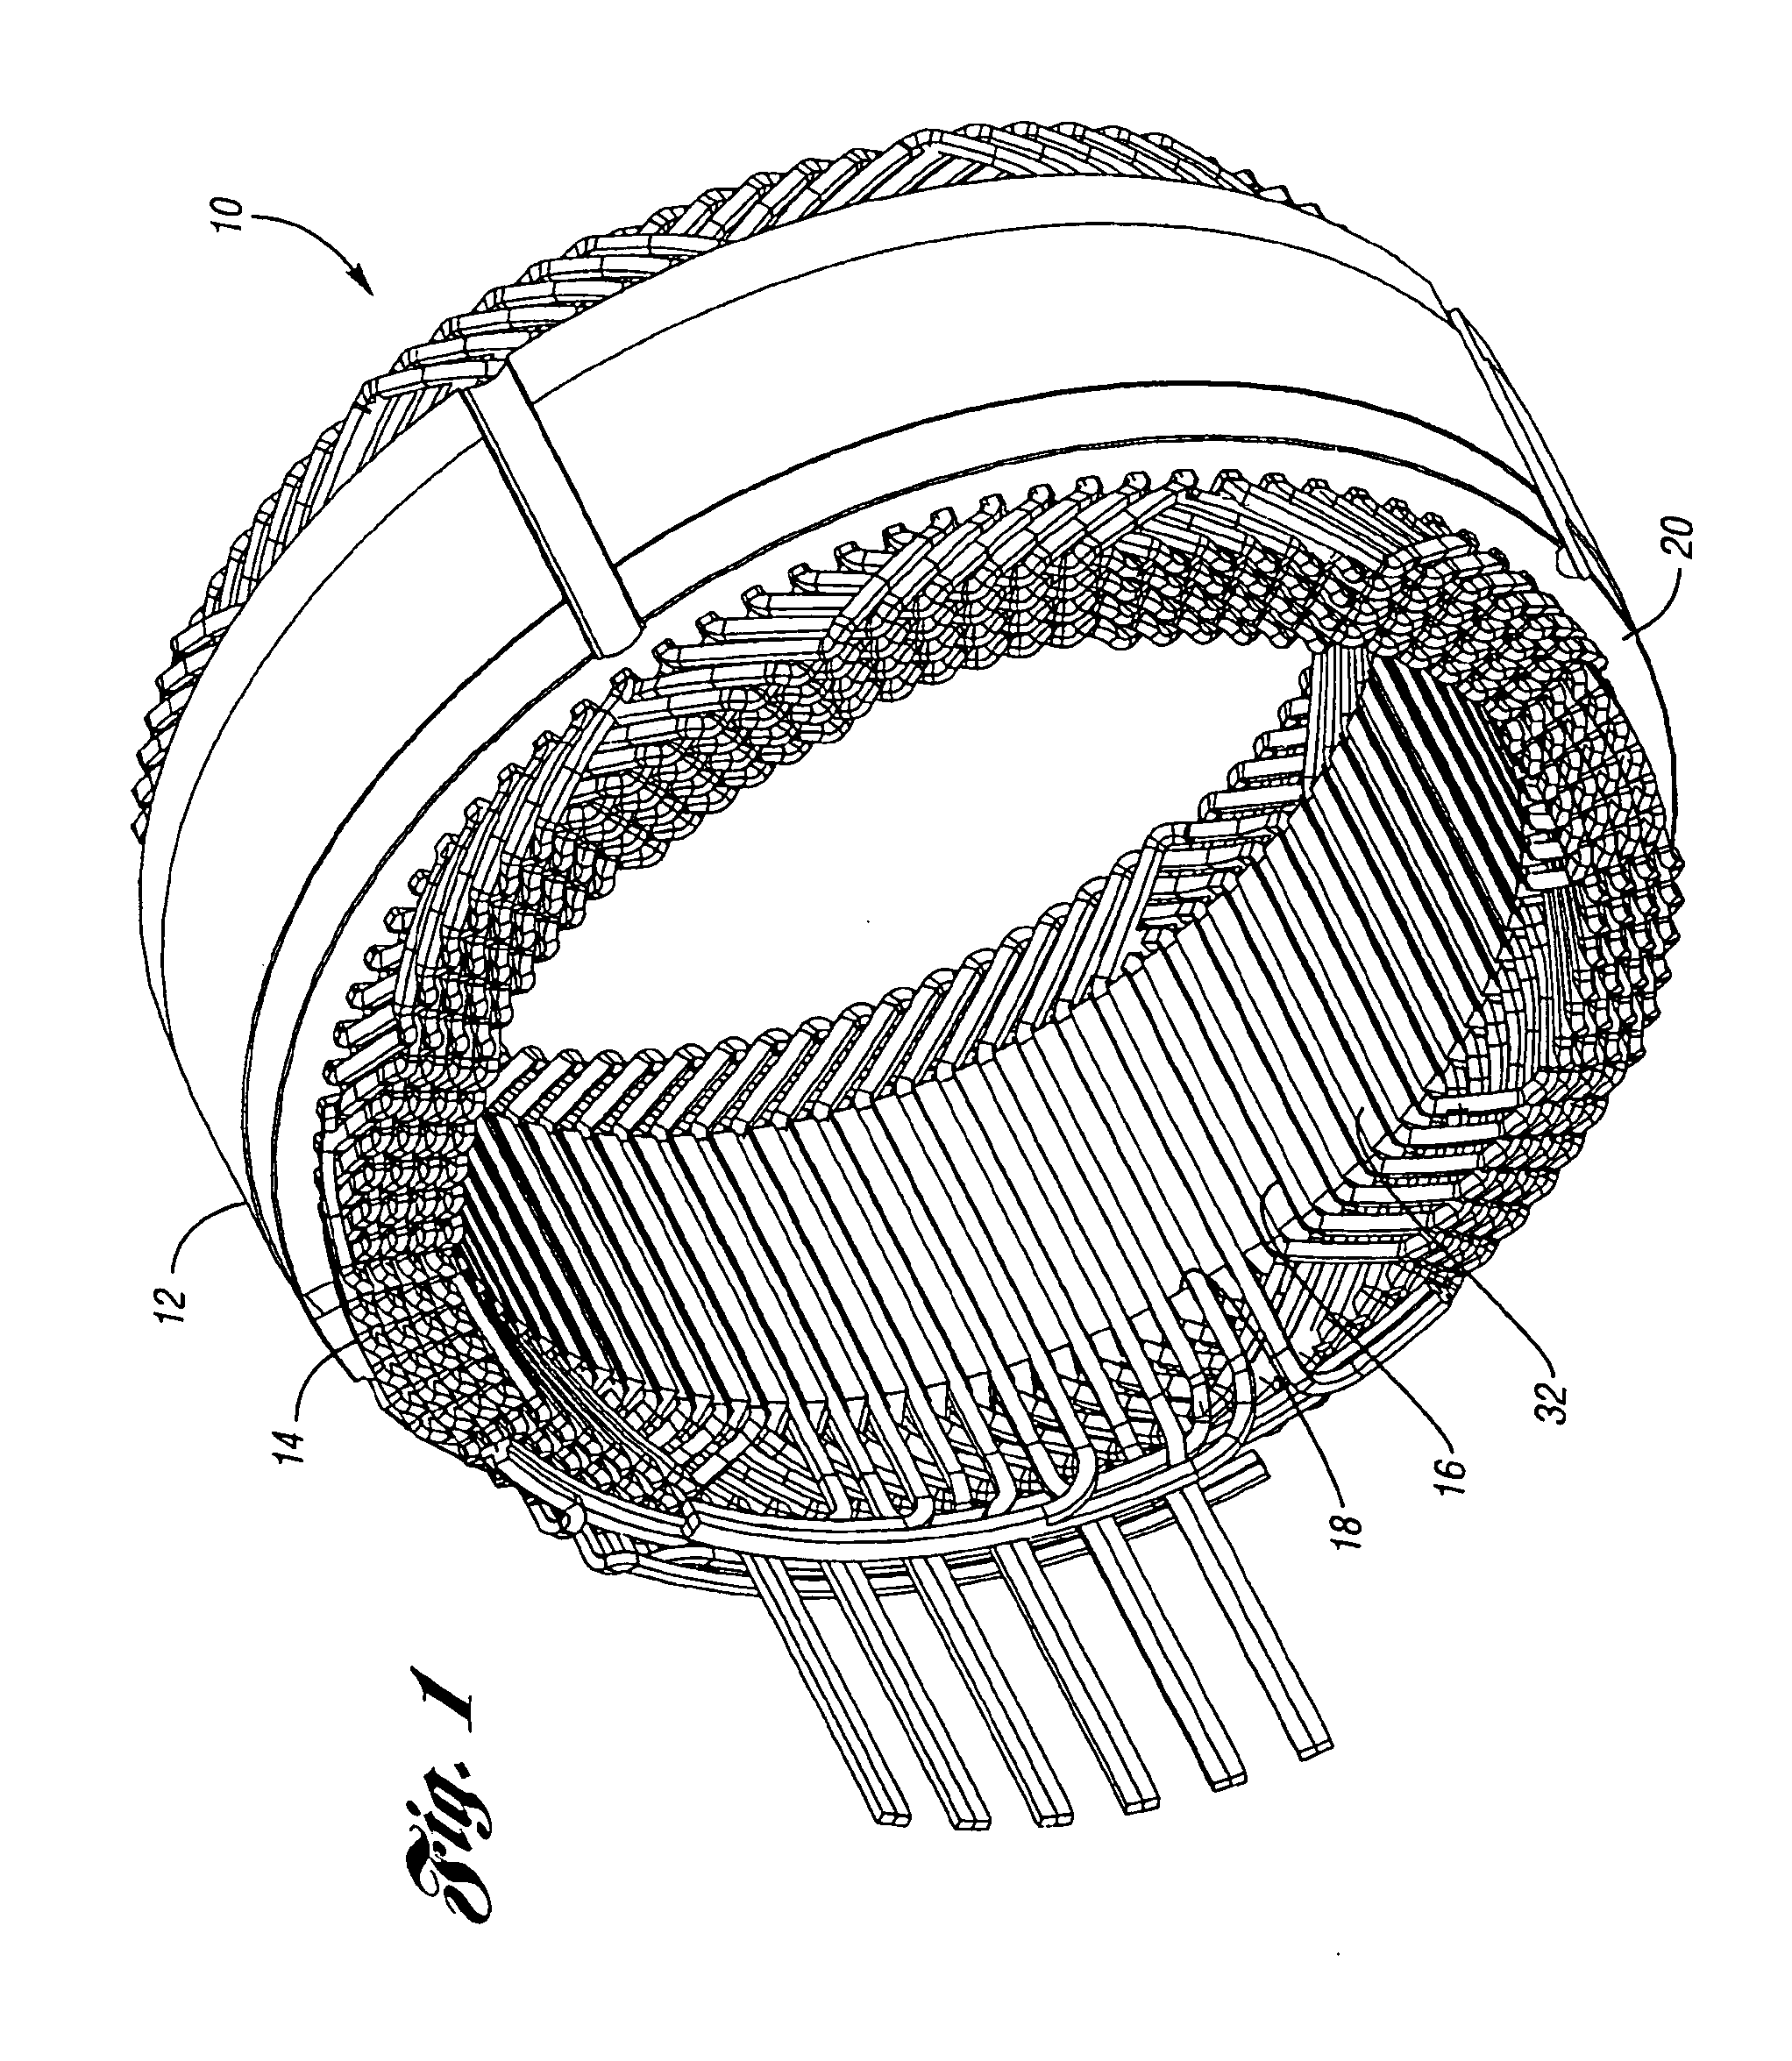 Method of making cascaded multilayer stator winding with interleaved transitions